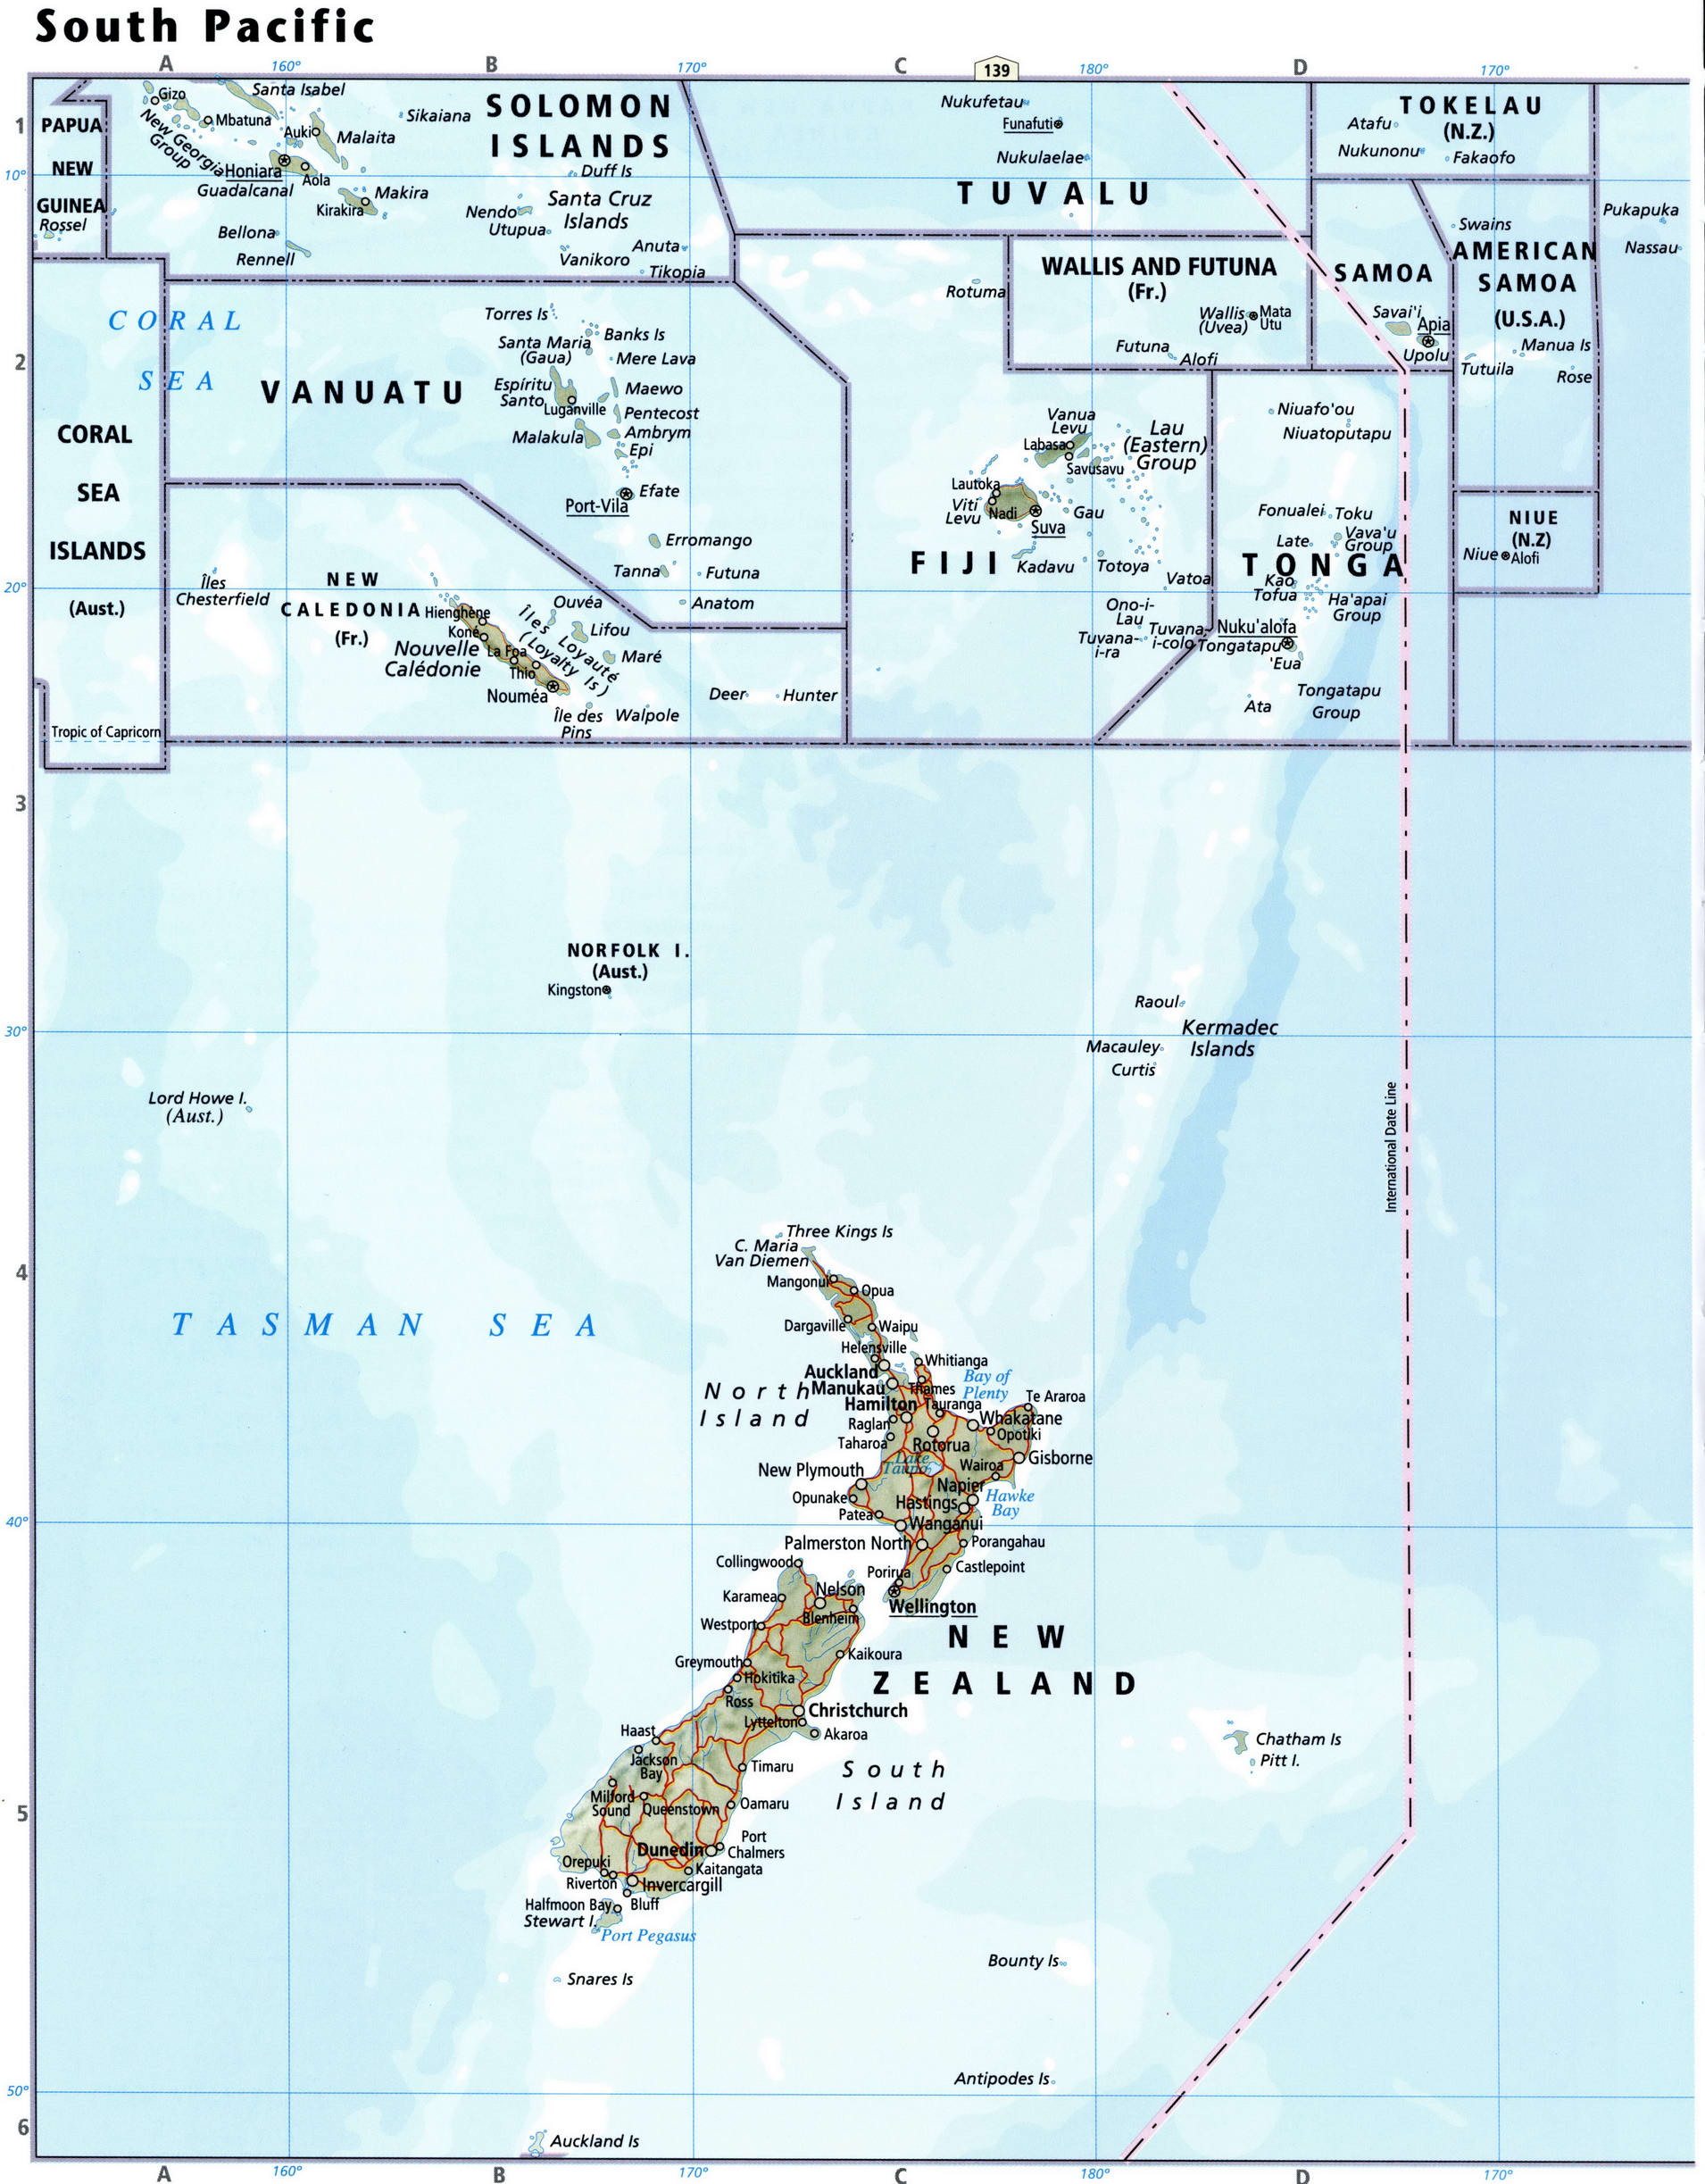 South Pcific Ocean map